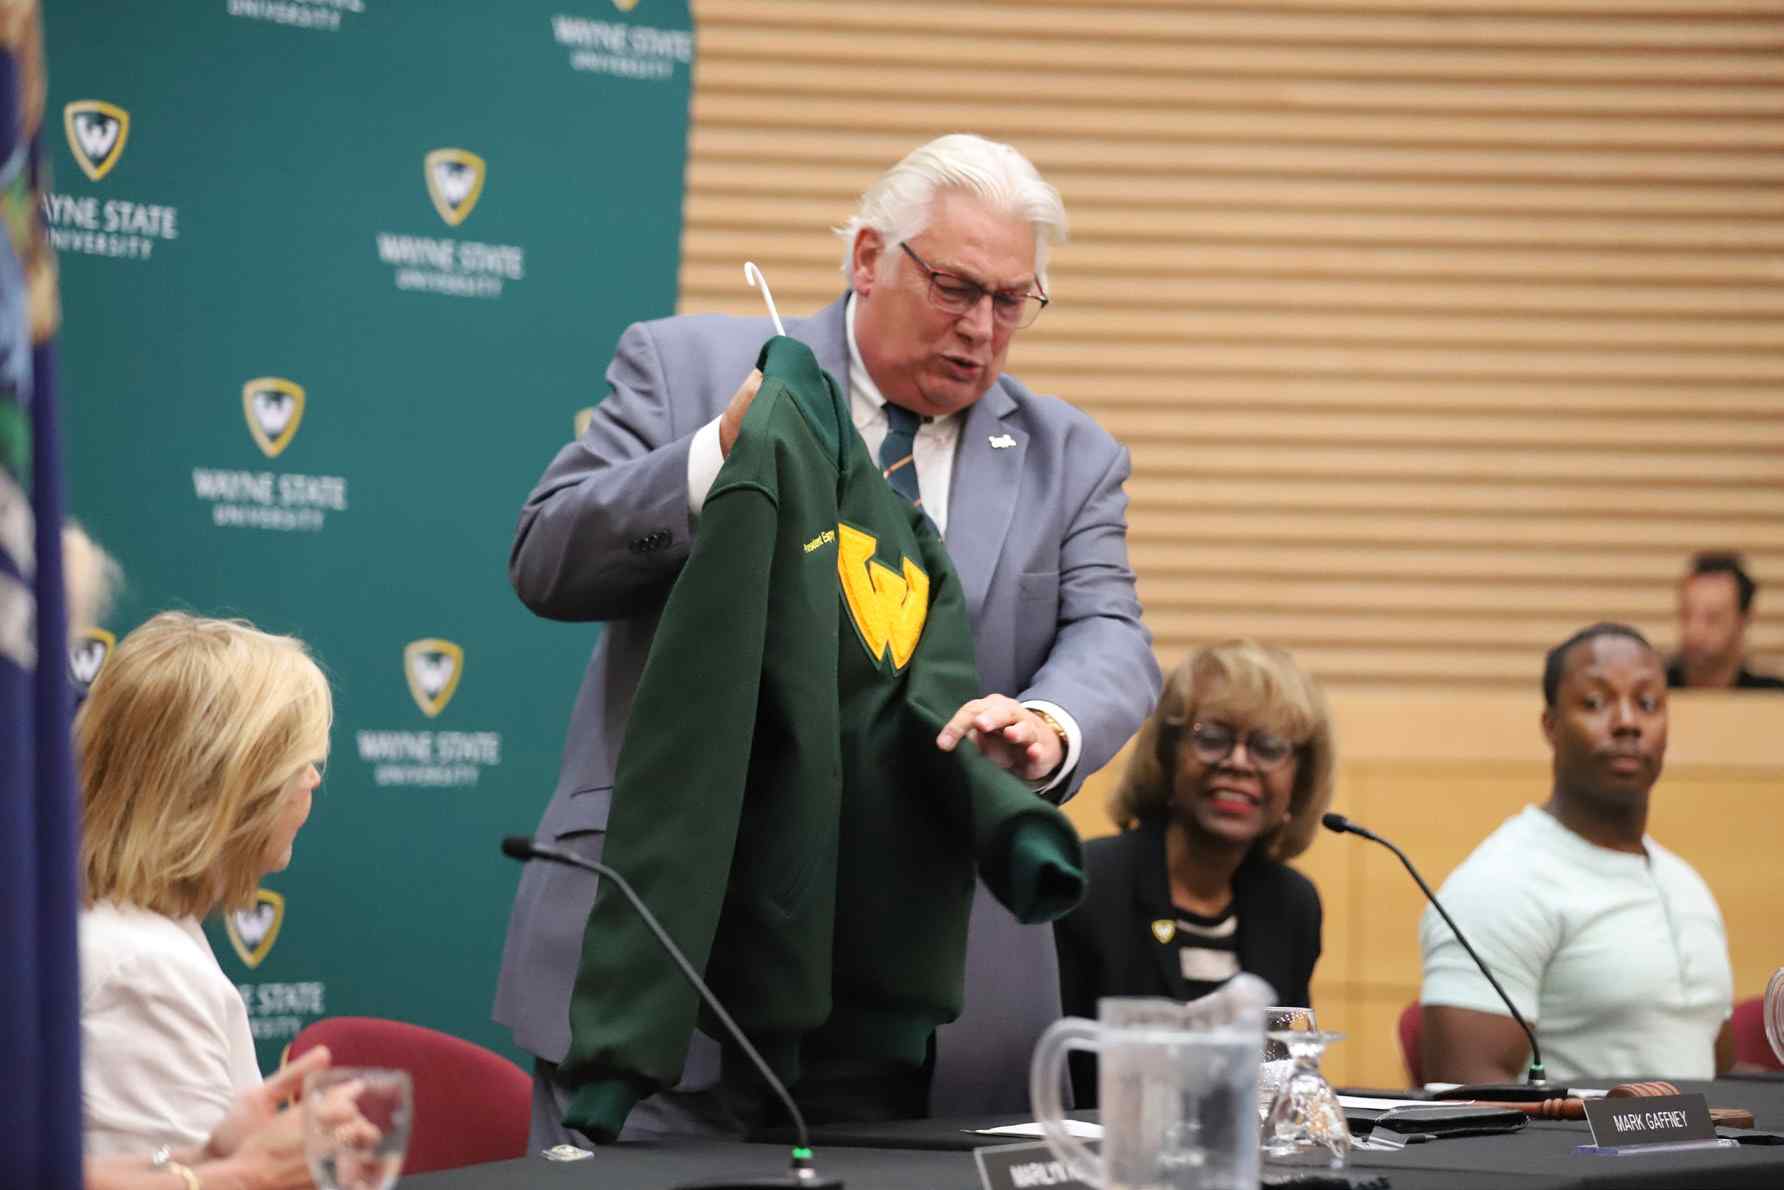 WSU Board Chair Mark Gaffney displays a gift of WSU gear for incoming President Espy. Also pictured are Board members Marilyn Kelly (left), along with Shirley Stancato and Bryan Barnihill (on right of Mark Gaffney).